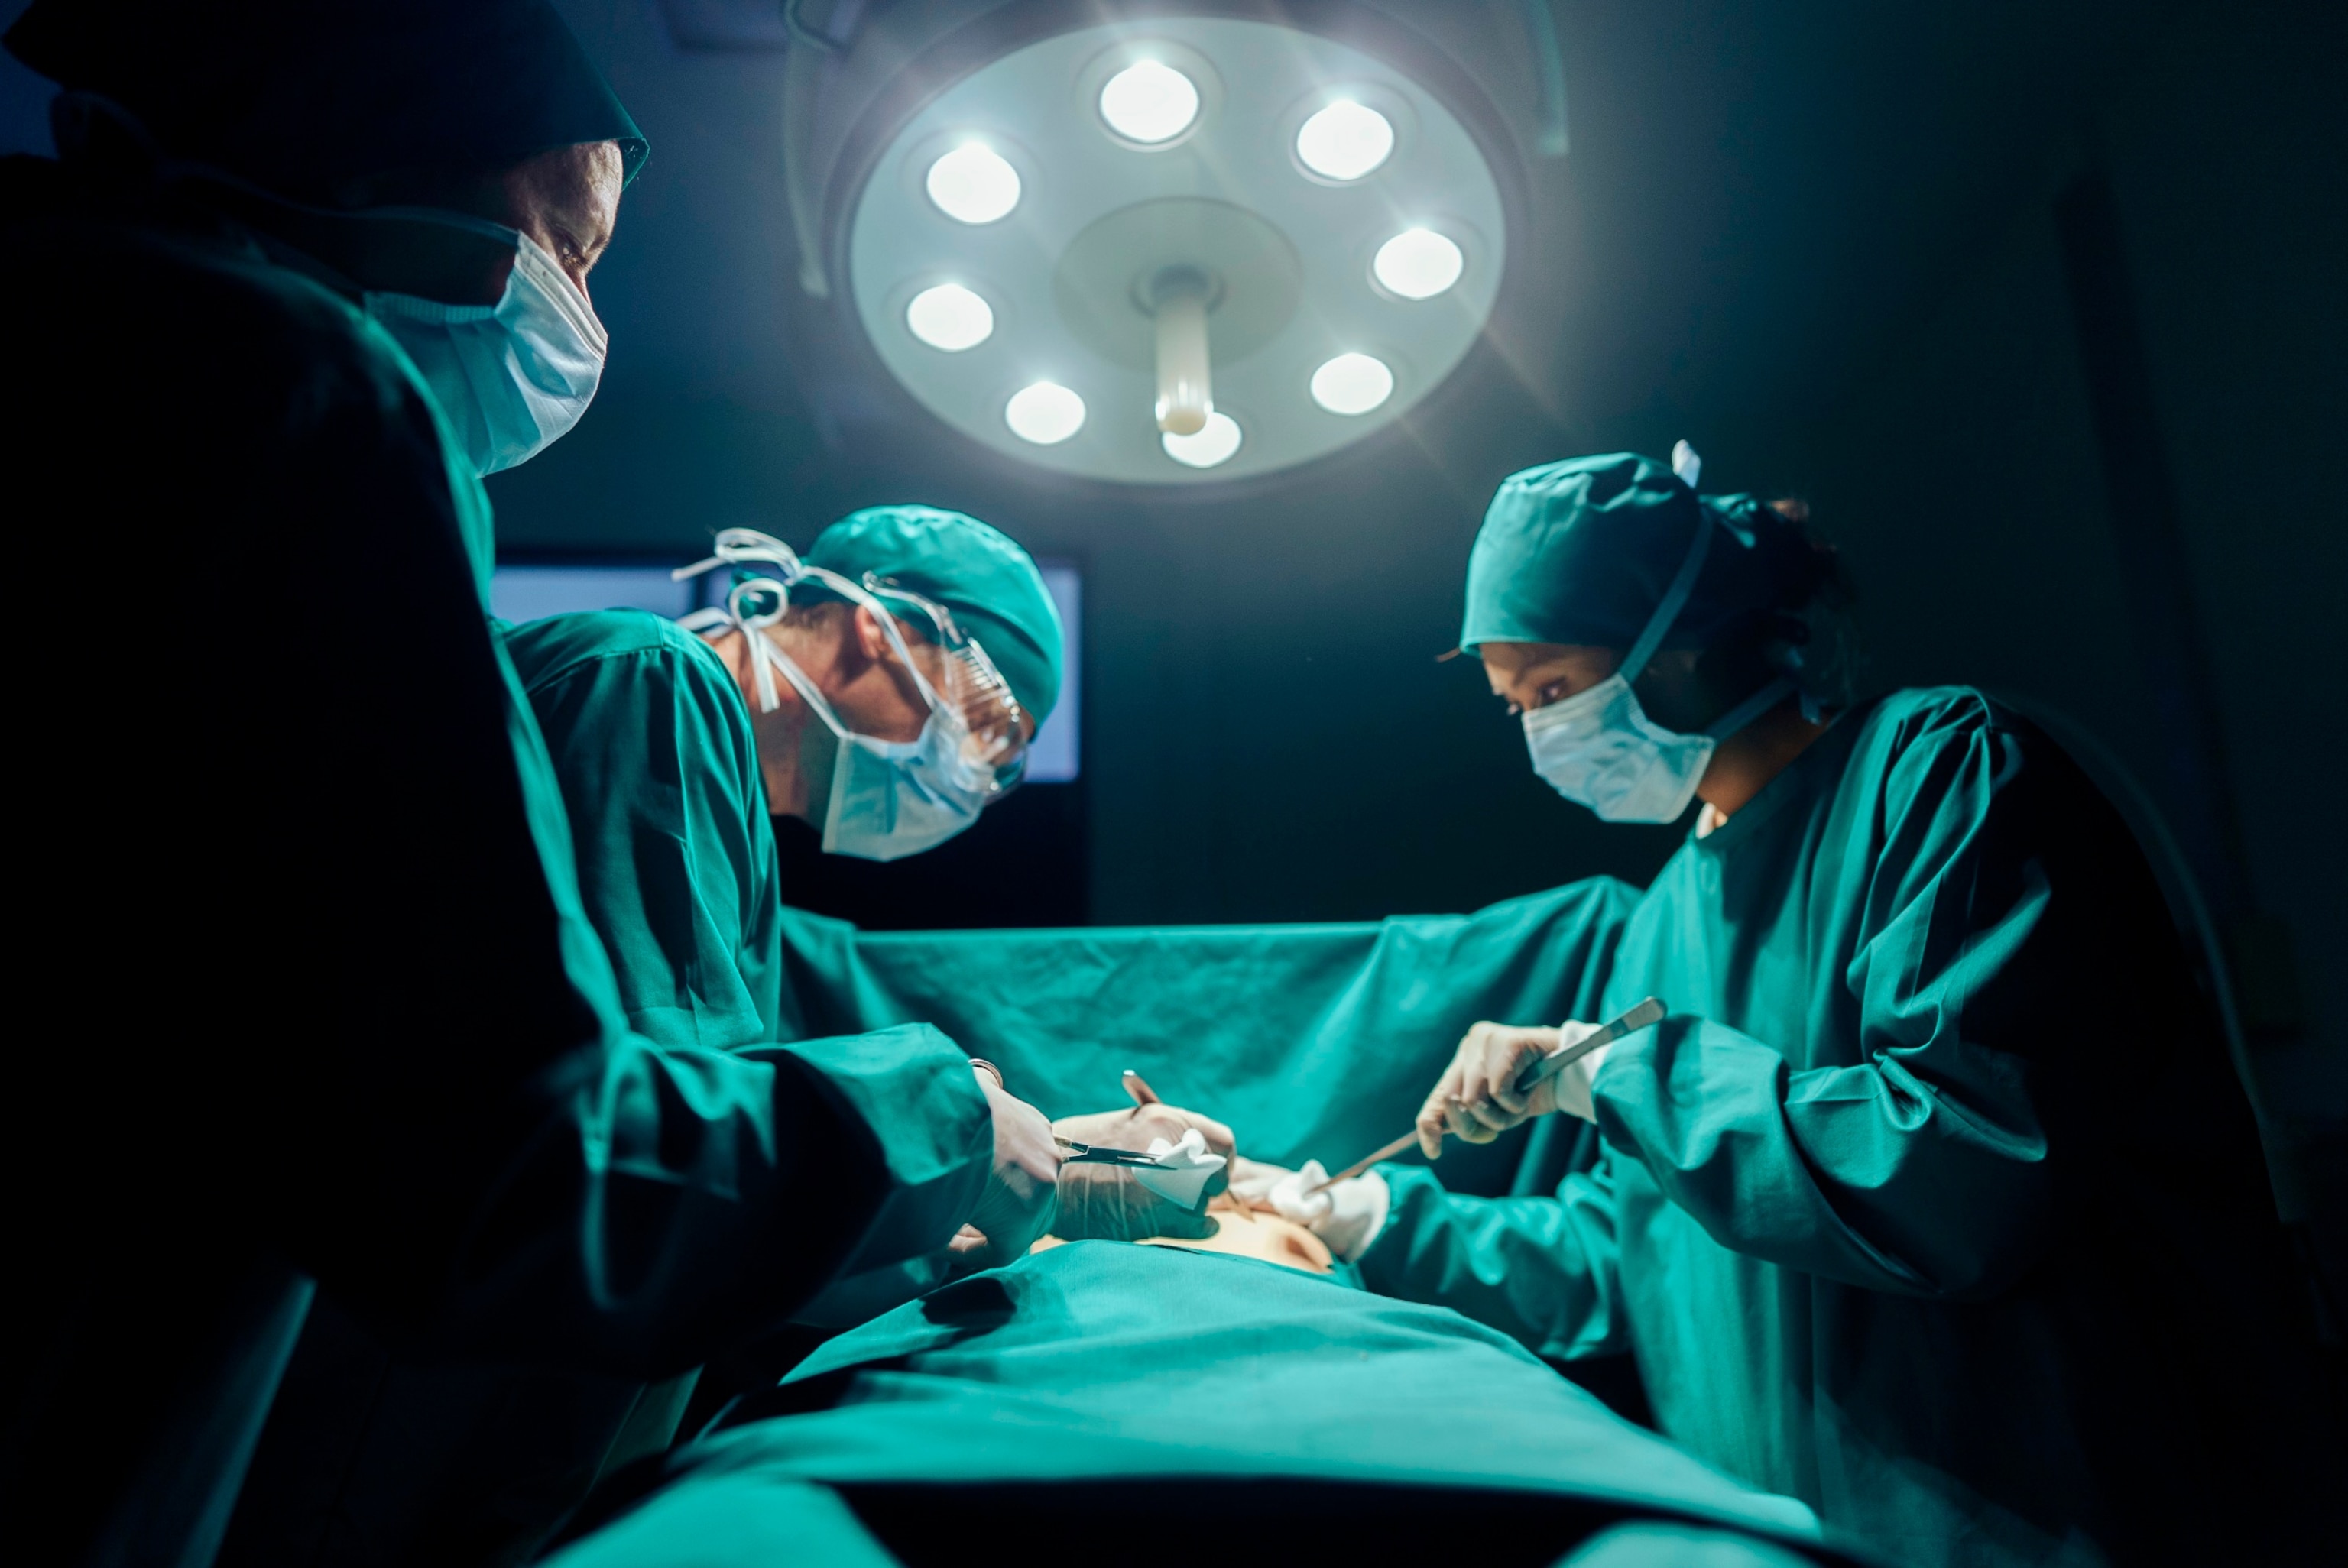 PHOTO: In this undated stock photo, three surgeons perform an operating on a patient.